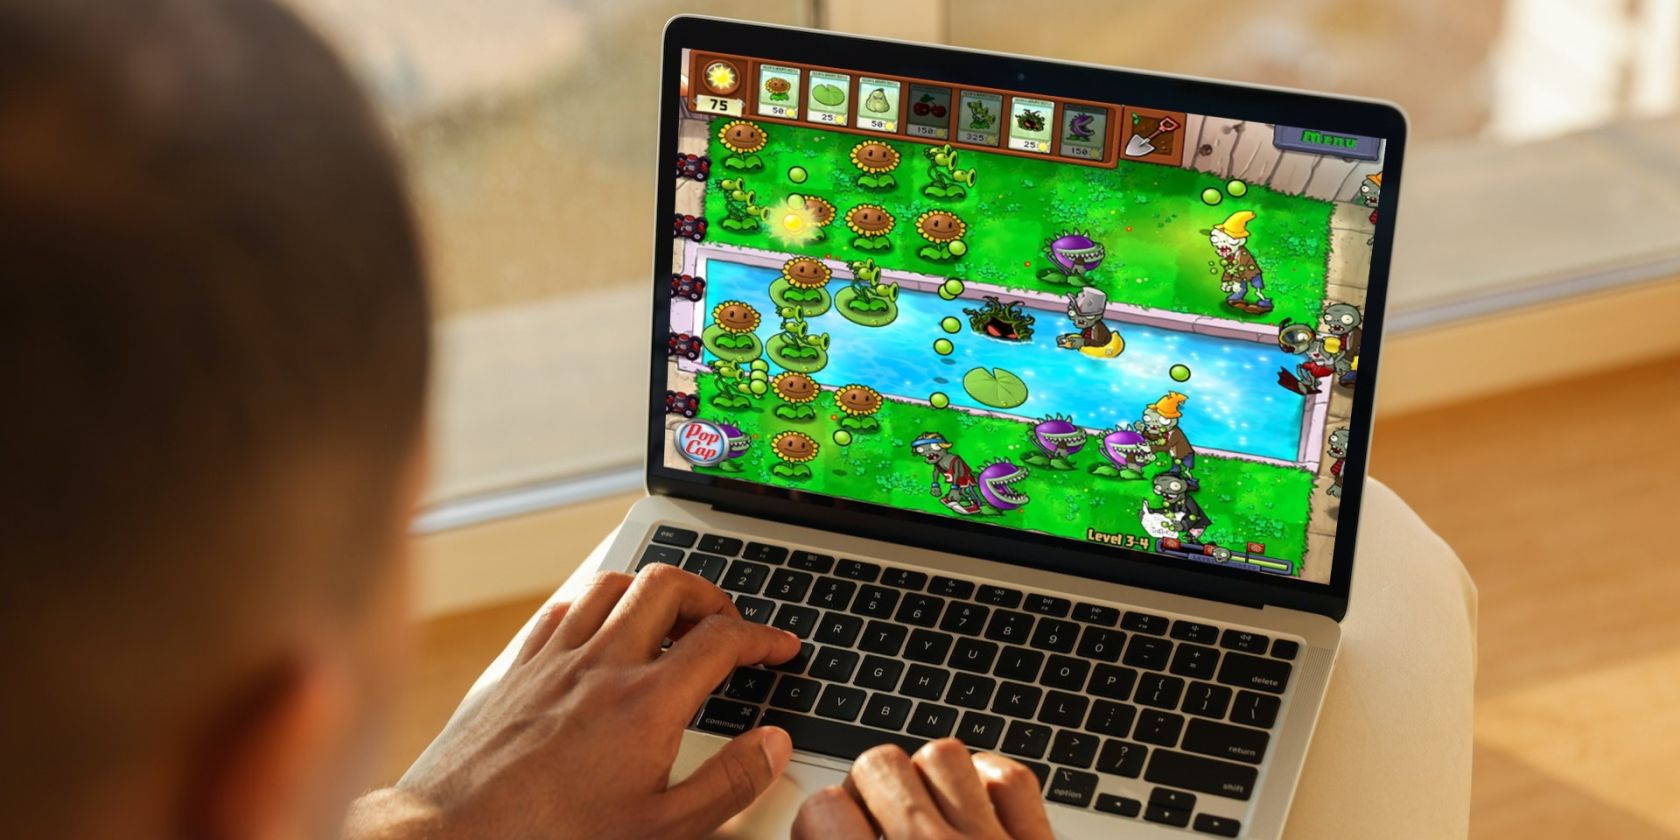 MacBook user playing a strategy game